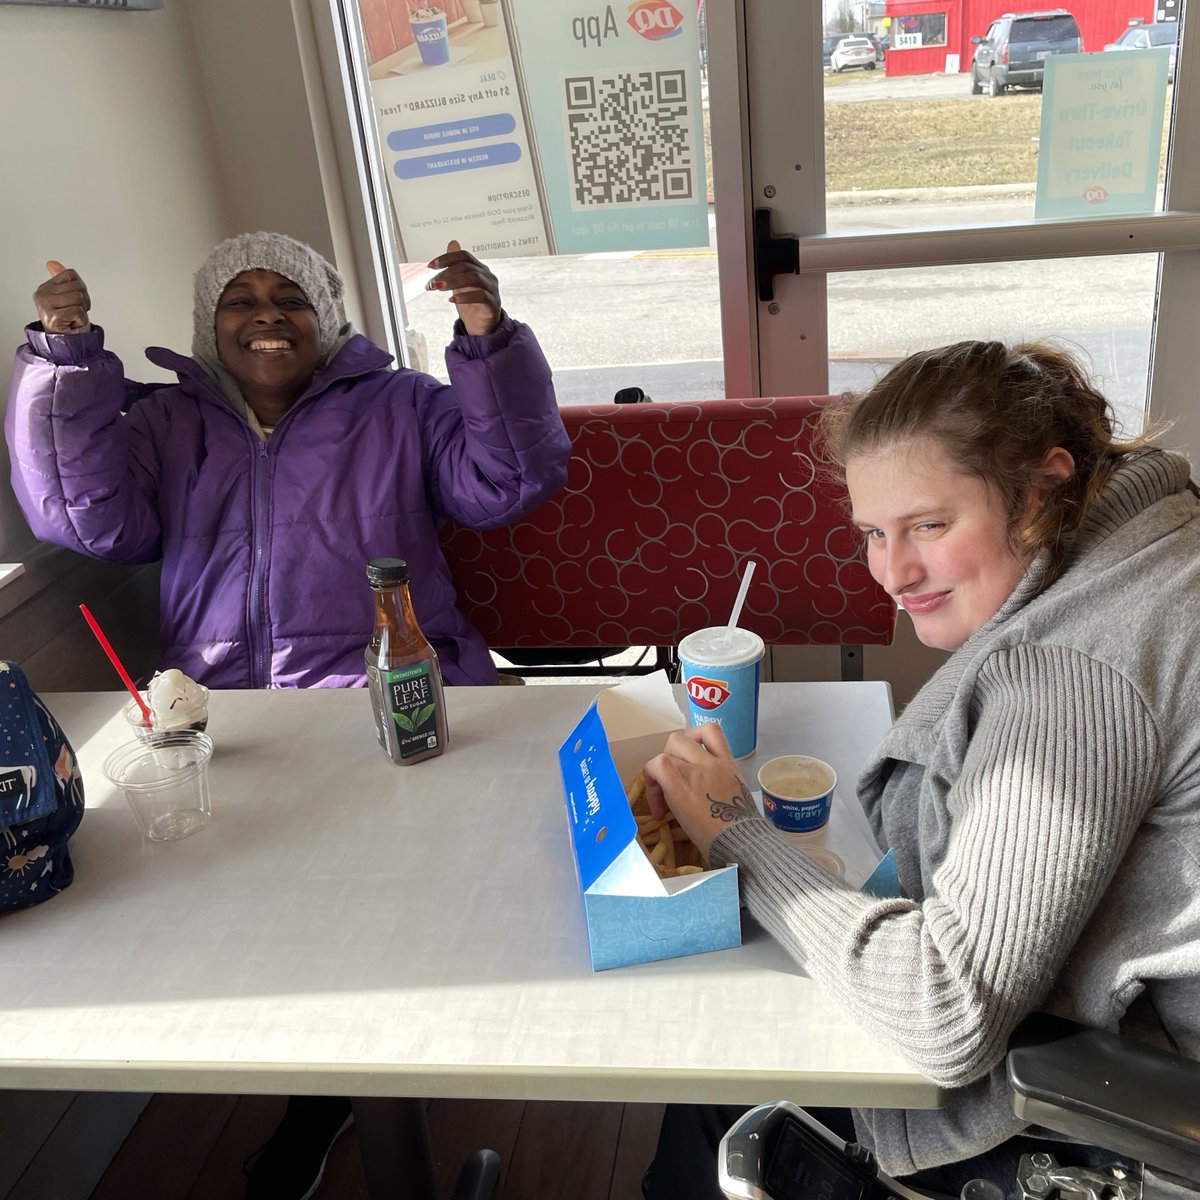 These CAC ladies had an eventful day picking up some goodies at Walmart, visiting the Battelle Darby Creek Nature Center, and having a delicious lunch at DQ!

#OpenDoorCbus #InspiringLifeJourneys #CareerActivityandCommunity #BattelleDarbyCreek #NatureCenter #CbusMetroParks